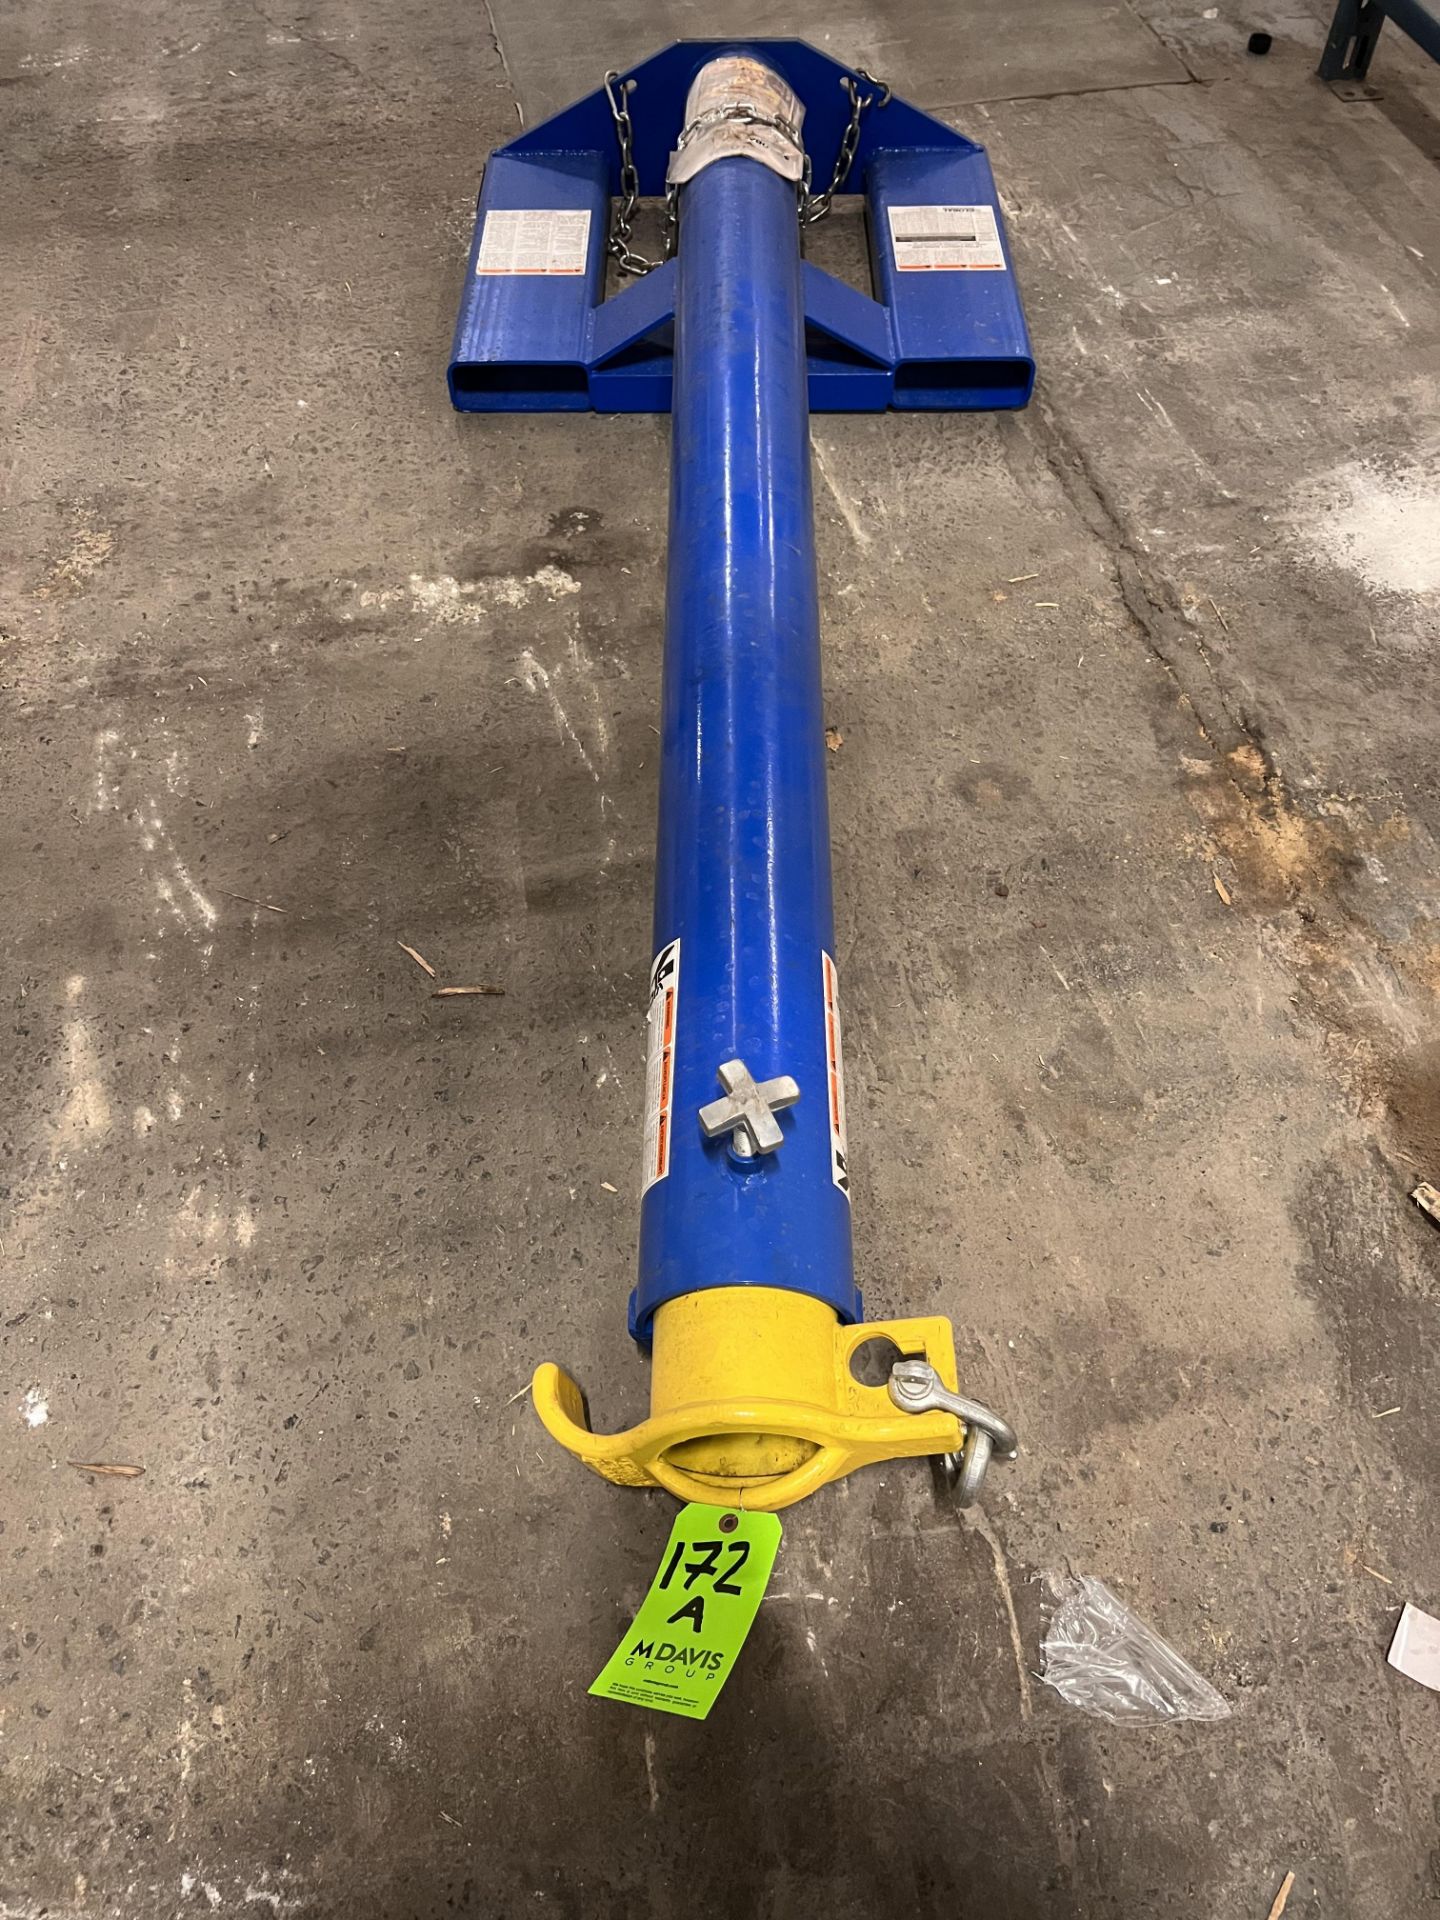 GLOBAL INDUSTRIAL TELESCOPING JIB BOOM CRANE, BELIEVED TO BE IN NEW CONDITION (LOADING FEE:  $20.